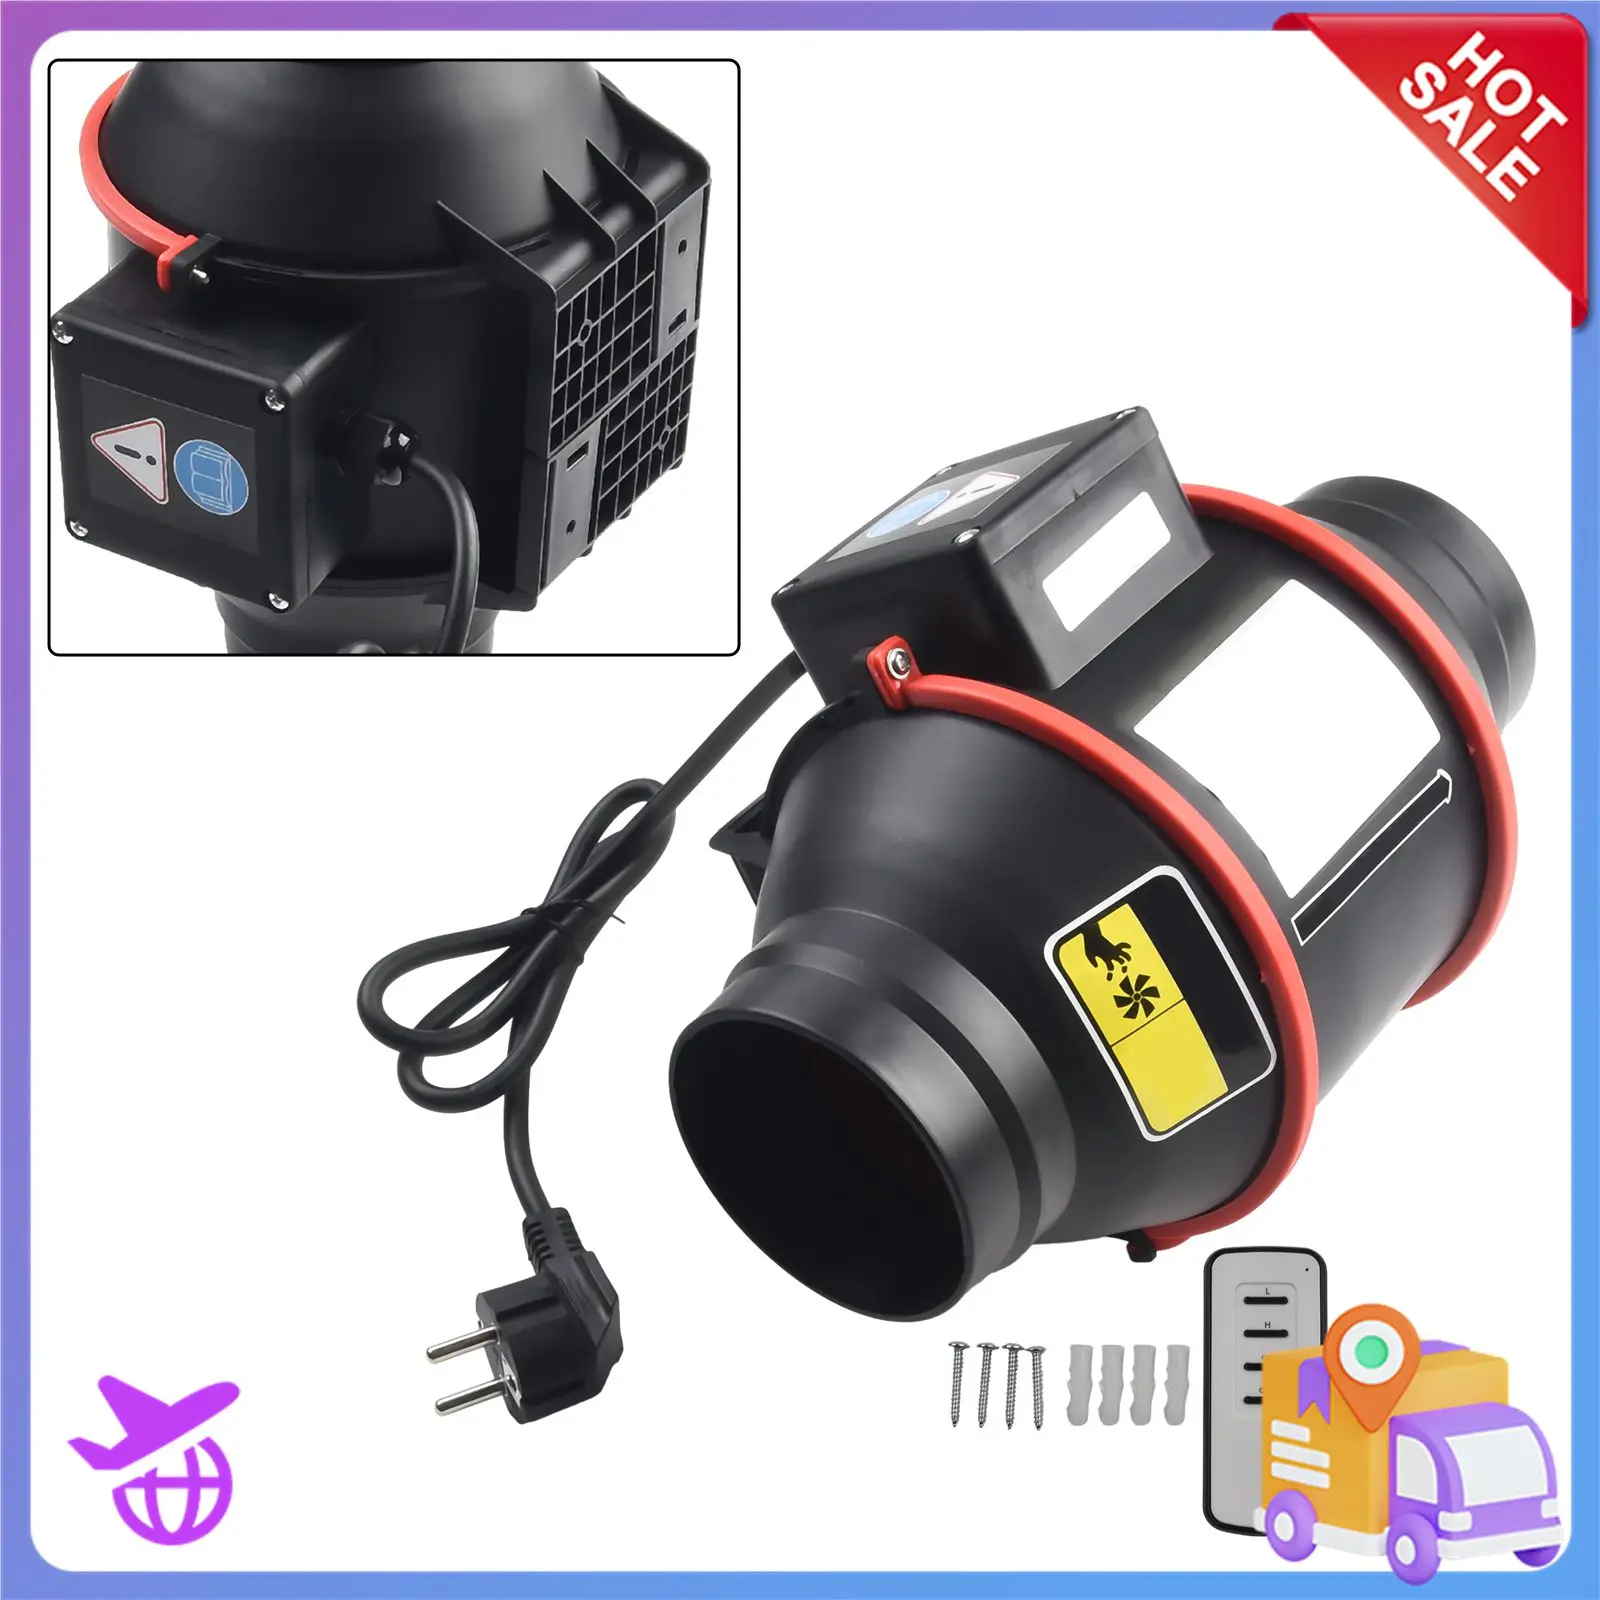 

4 Inch 100mm Flue Exhaust Fan Inline Pipe Duct Fan Extractor Ventilation With Variable Speed Control Wall Air Clean Ventilator